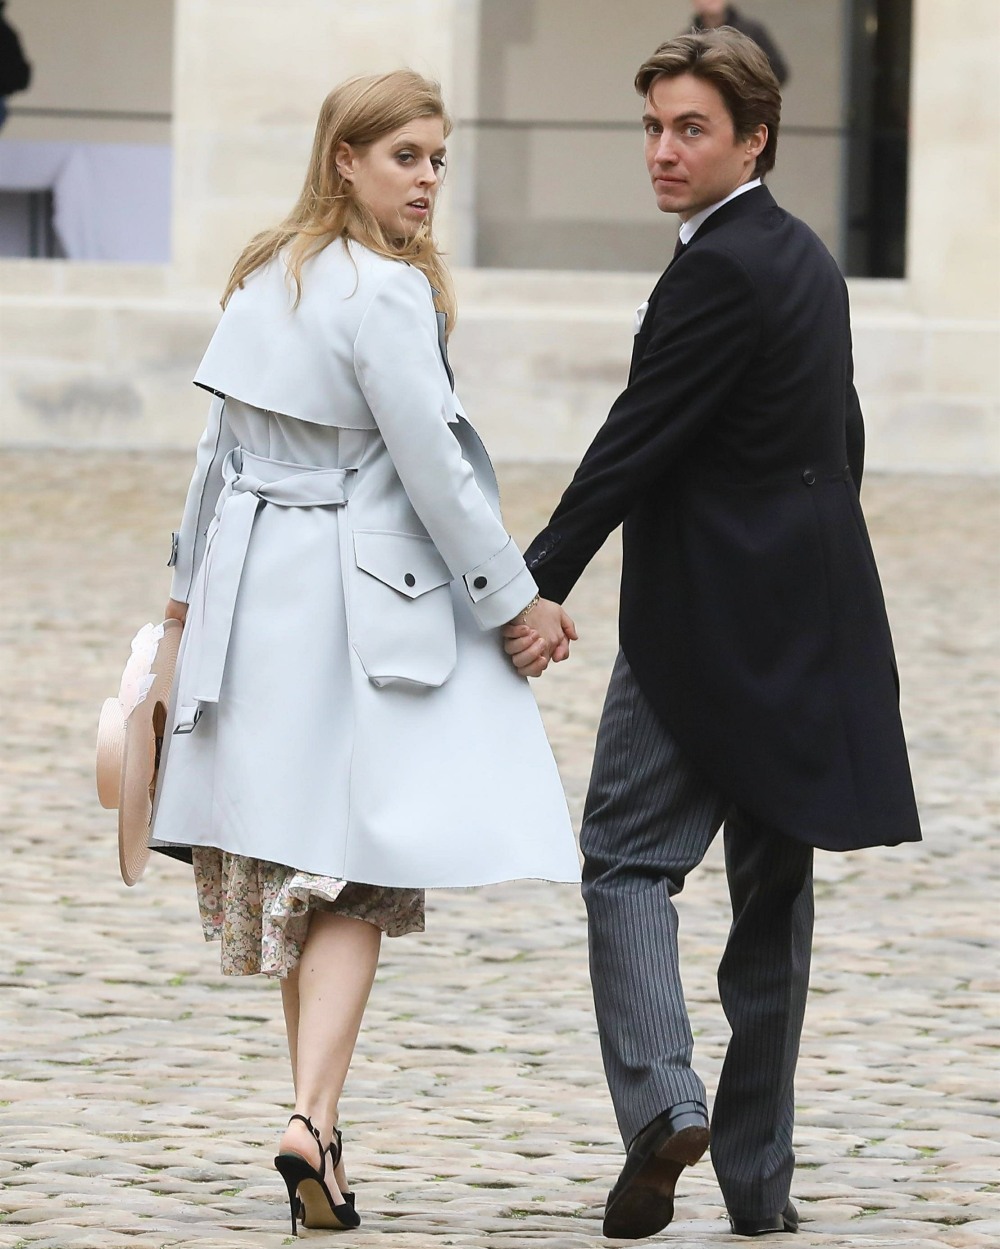 Prince Jean-Christophe Napoléon and Olympia d'Arco-Zinneberg are married